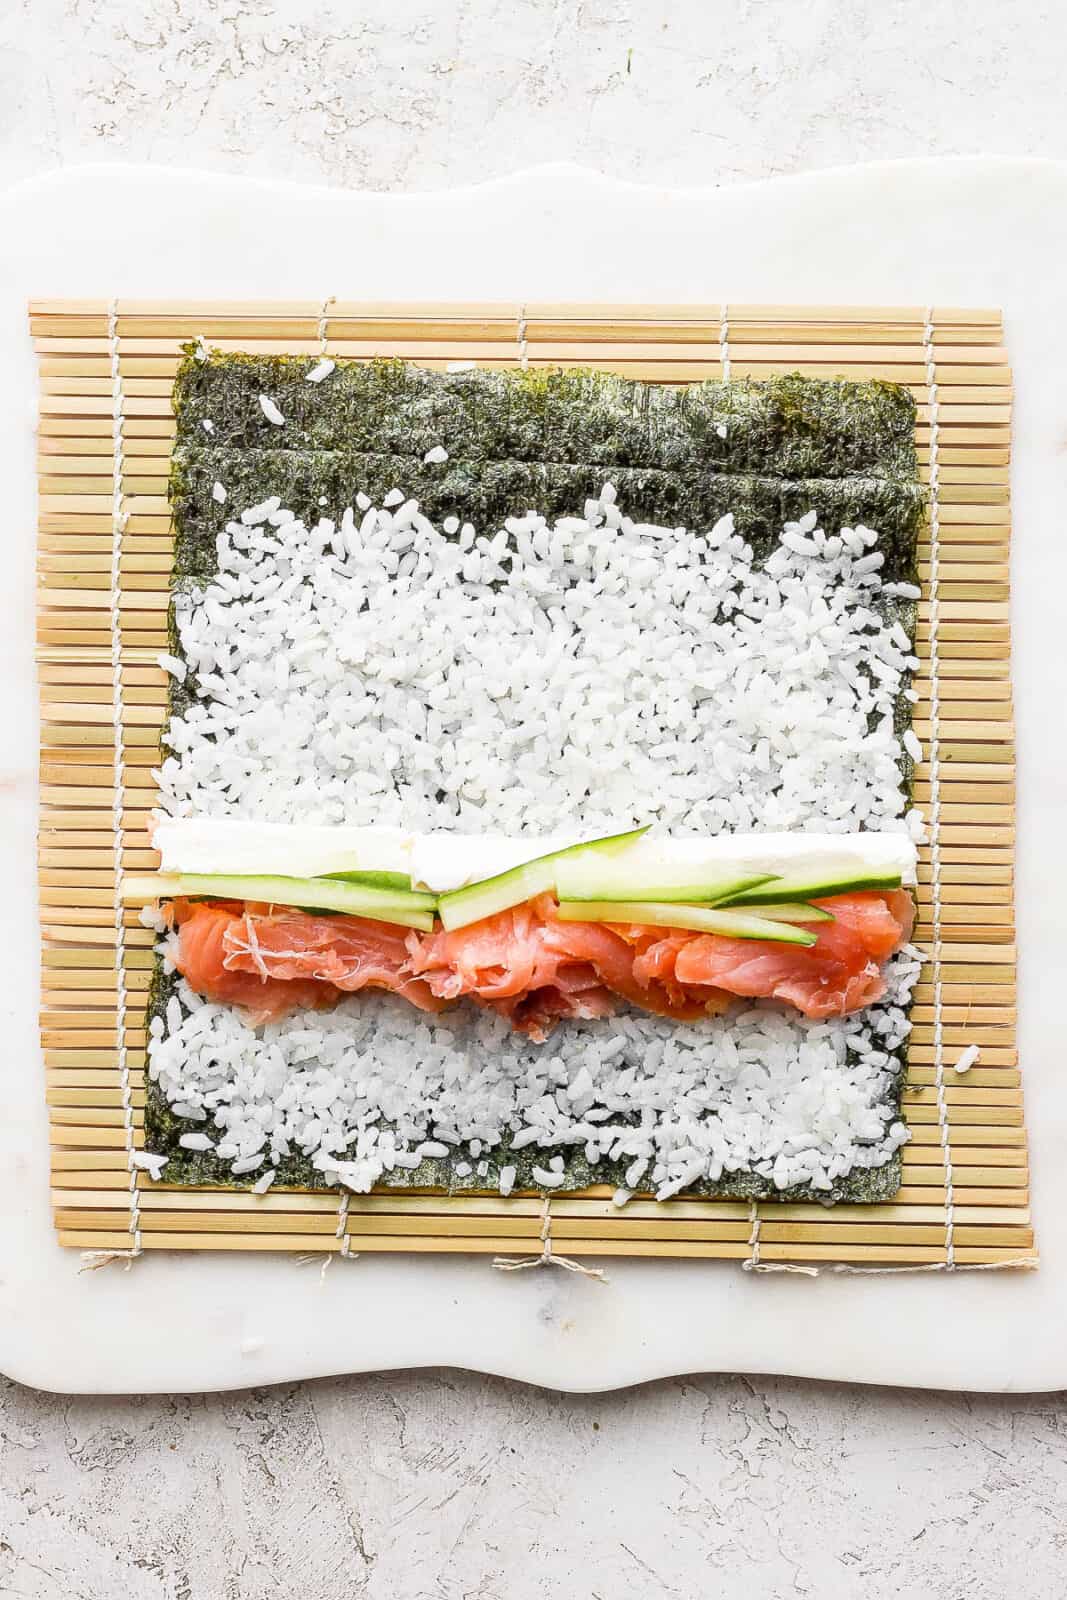 A nori sheet on top of a bamboo sheet with sushi rice spread on it and filling ingredients placed near the bottom.